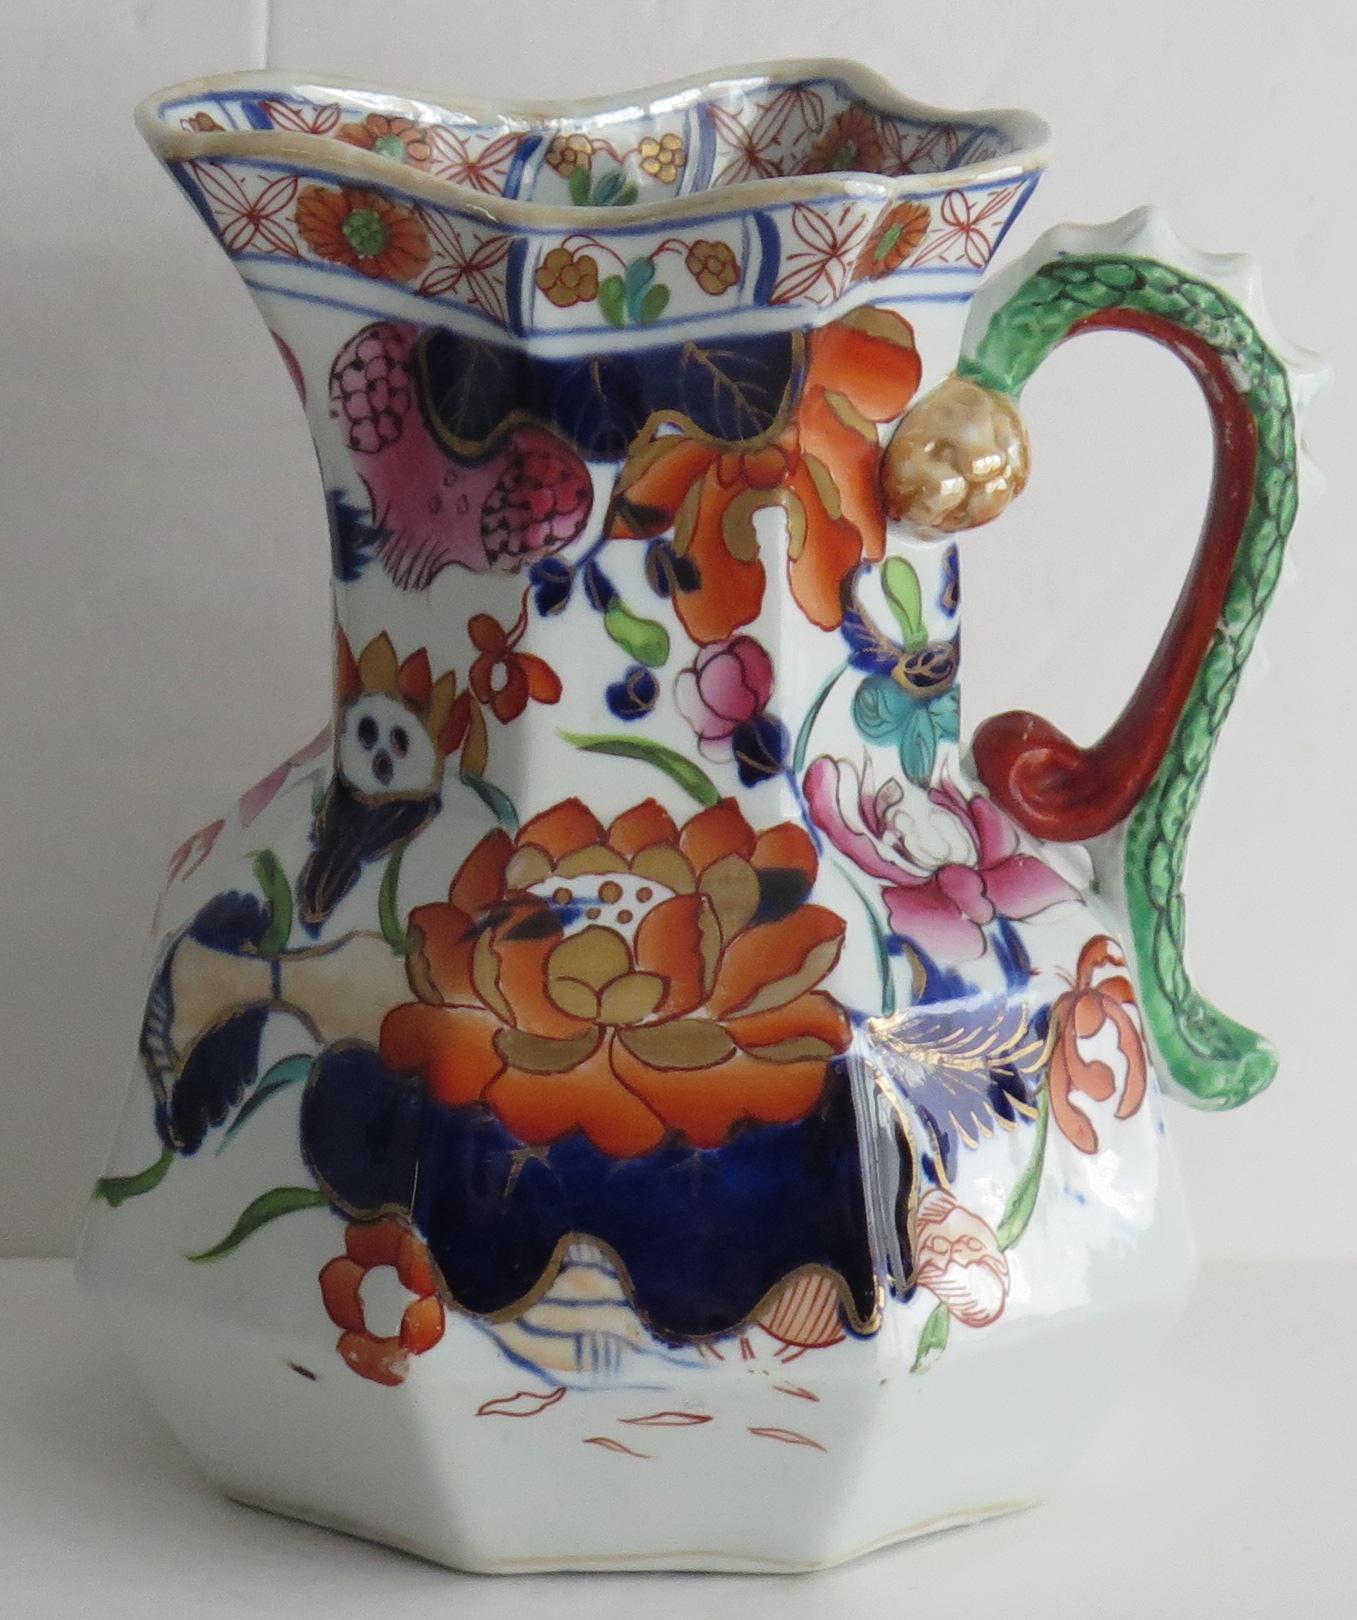 This is a beautiful, early jug or pitcher in the highly collected Water Lily pattern, made by Mason's Ironstone, England, circa 1817.

The jug has the Hydra shape with the snake heads handle with lower spur. 

This jug has one of the highly